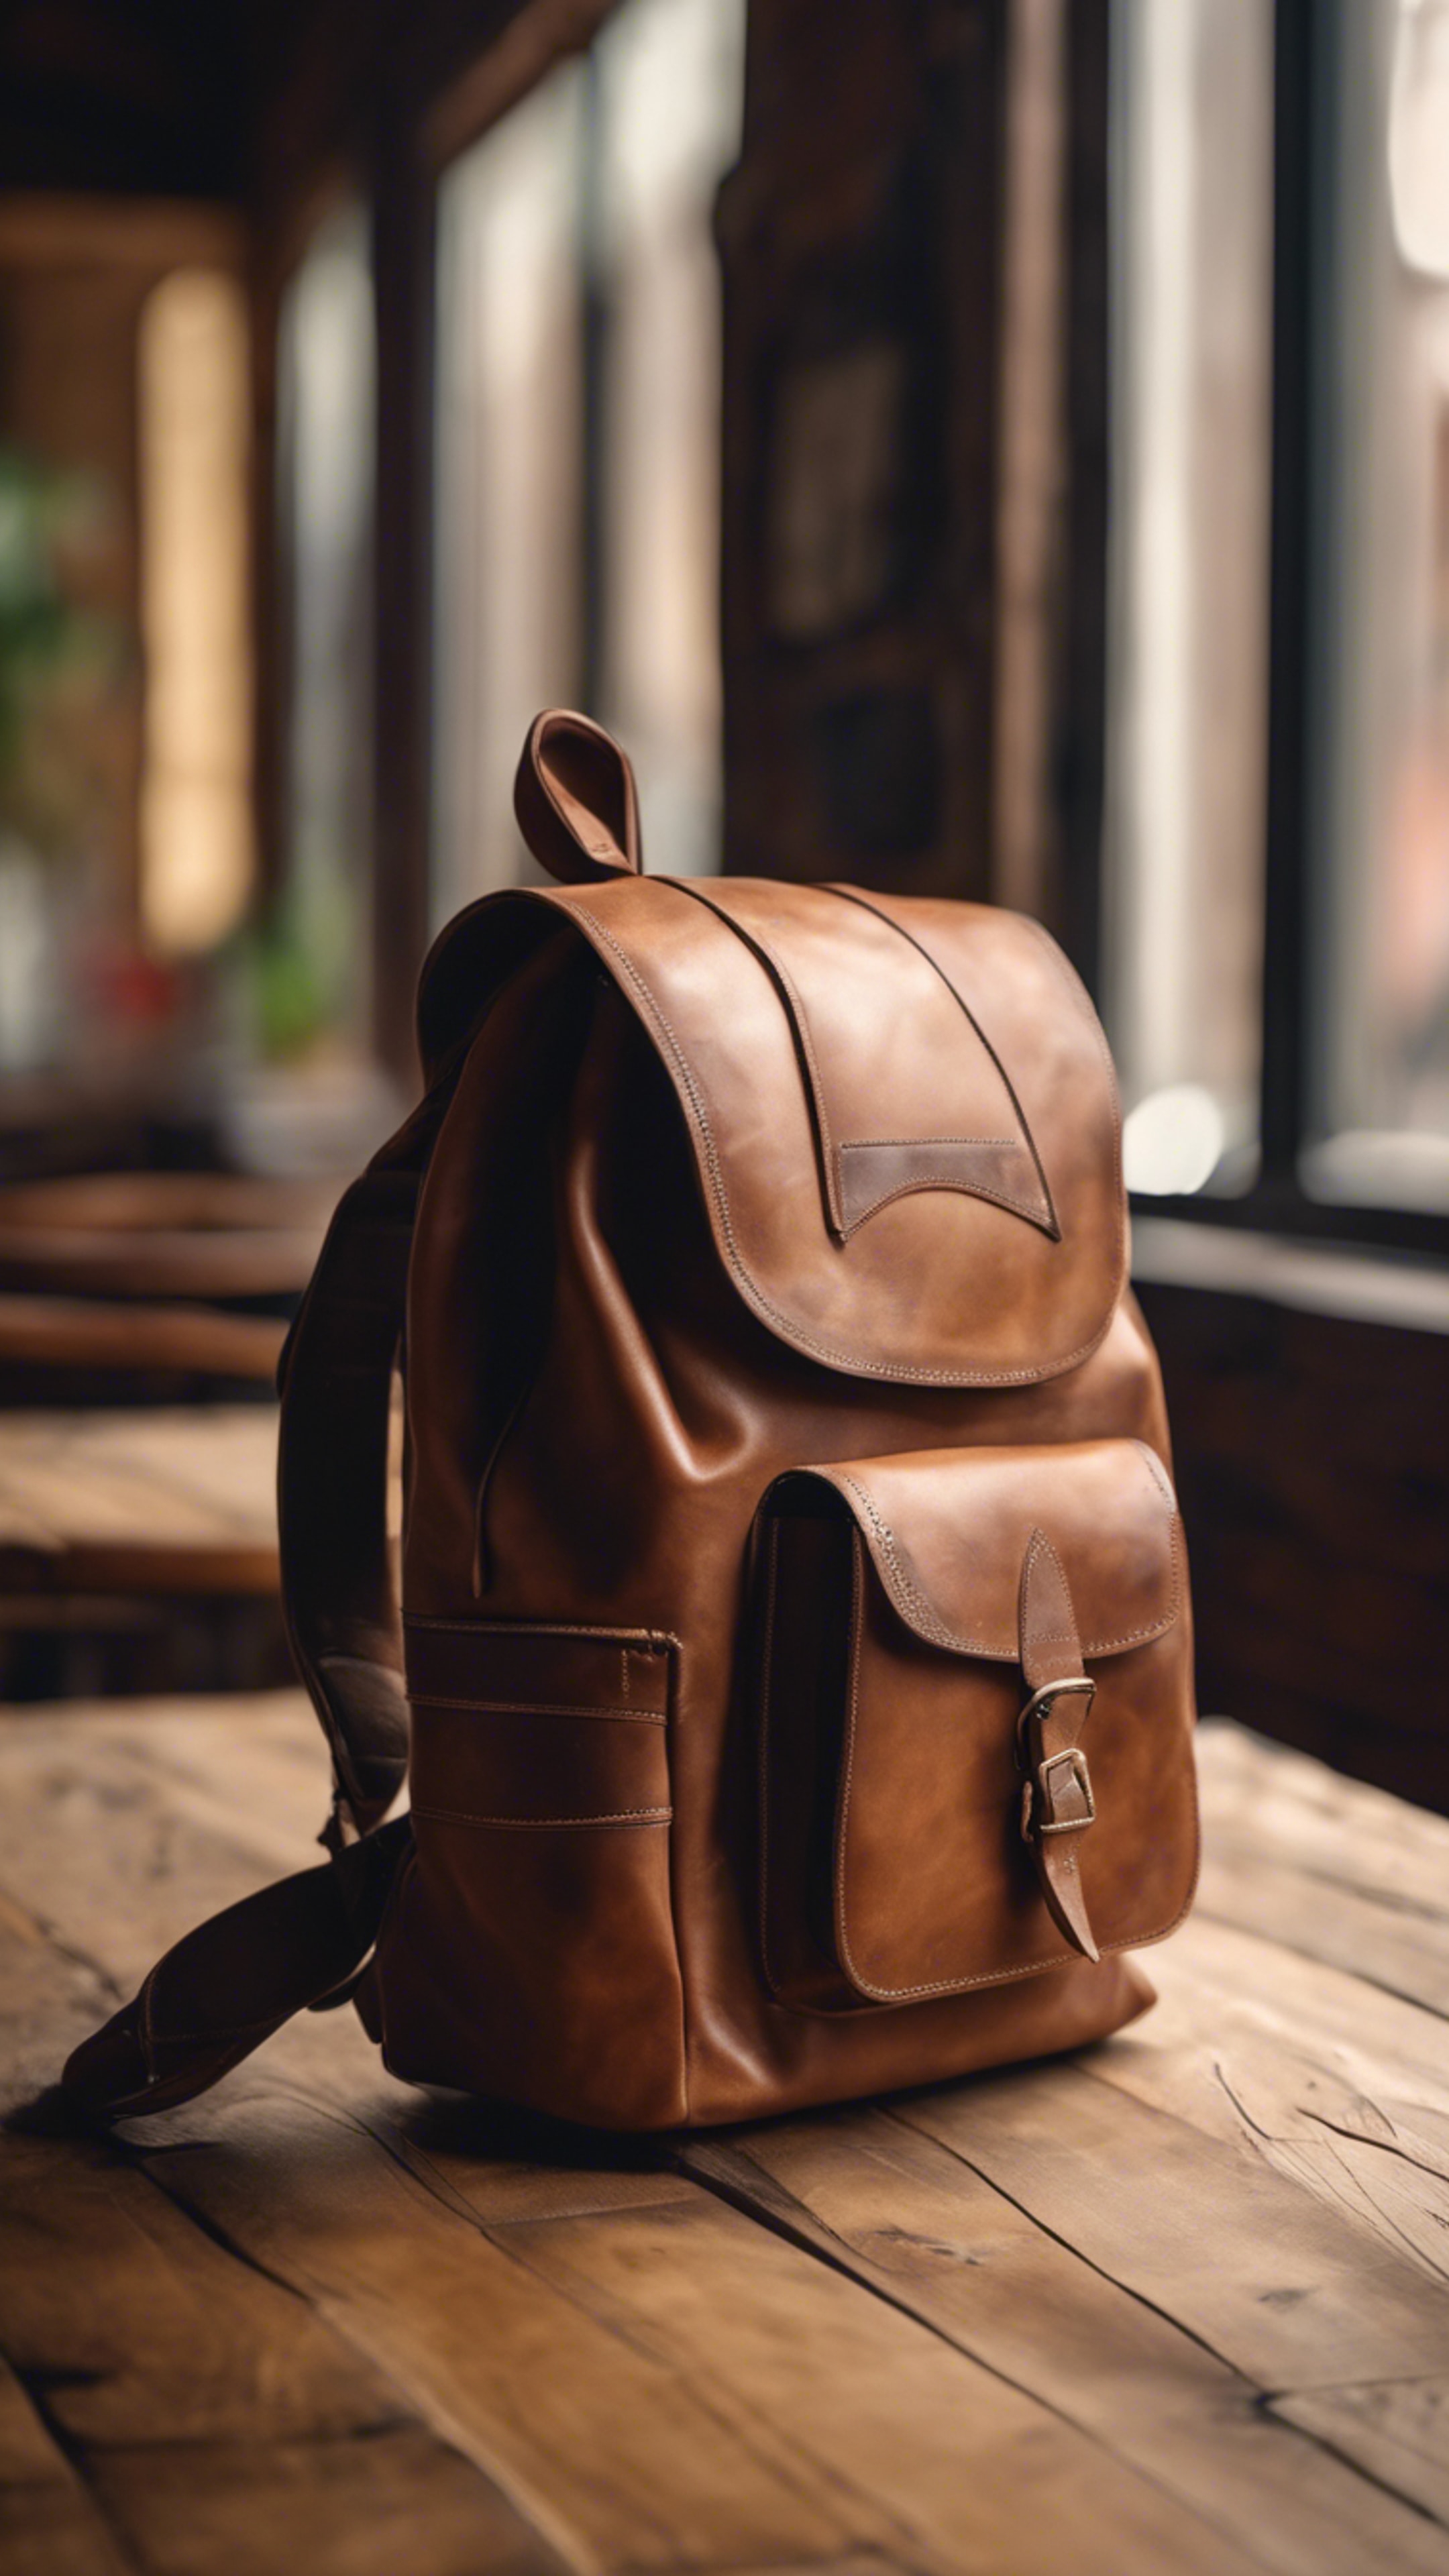 A vintage brown leather backpack sitting on a wooden table in a cozy café. ផ្ទាំង​រូបភាព[7ce12483b5e34217b072]